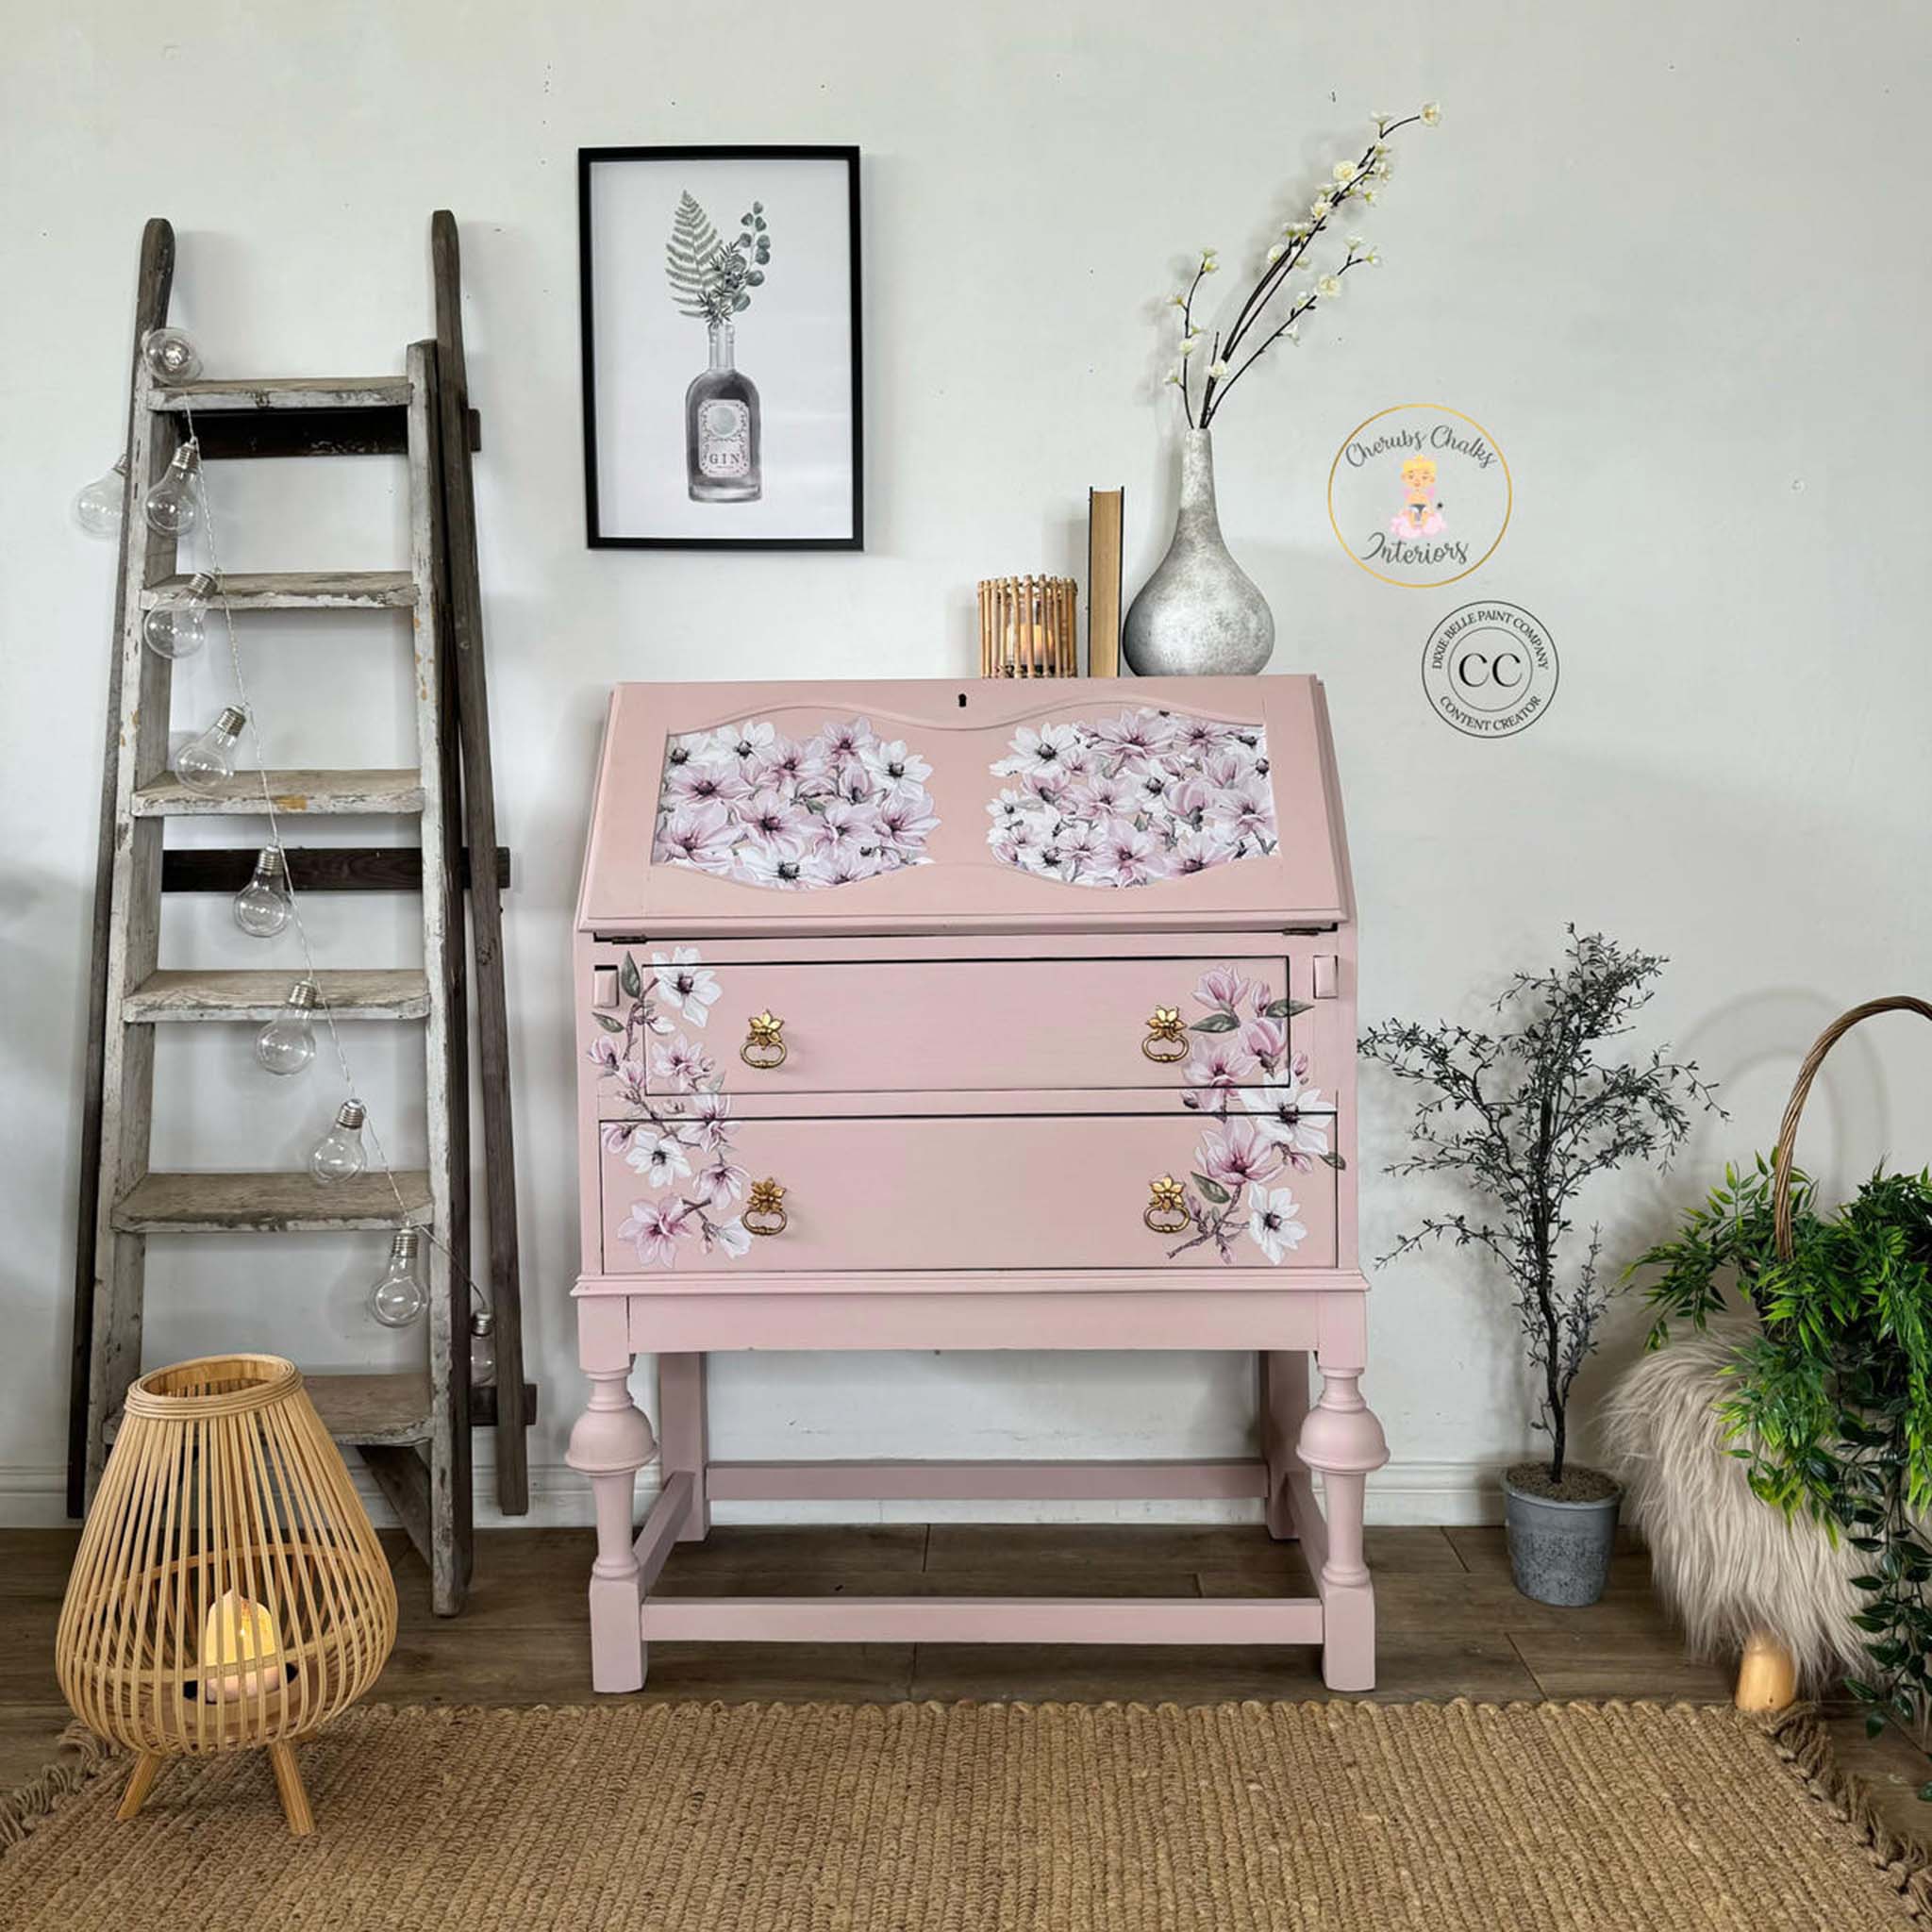 A vintage secretary's desk refurbished by Cherub's Chalks Interiors is painted light pink and features Belles and Whistles' Magnificent Magnolia transfer on it.